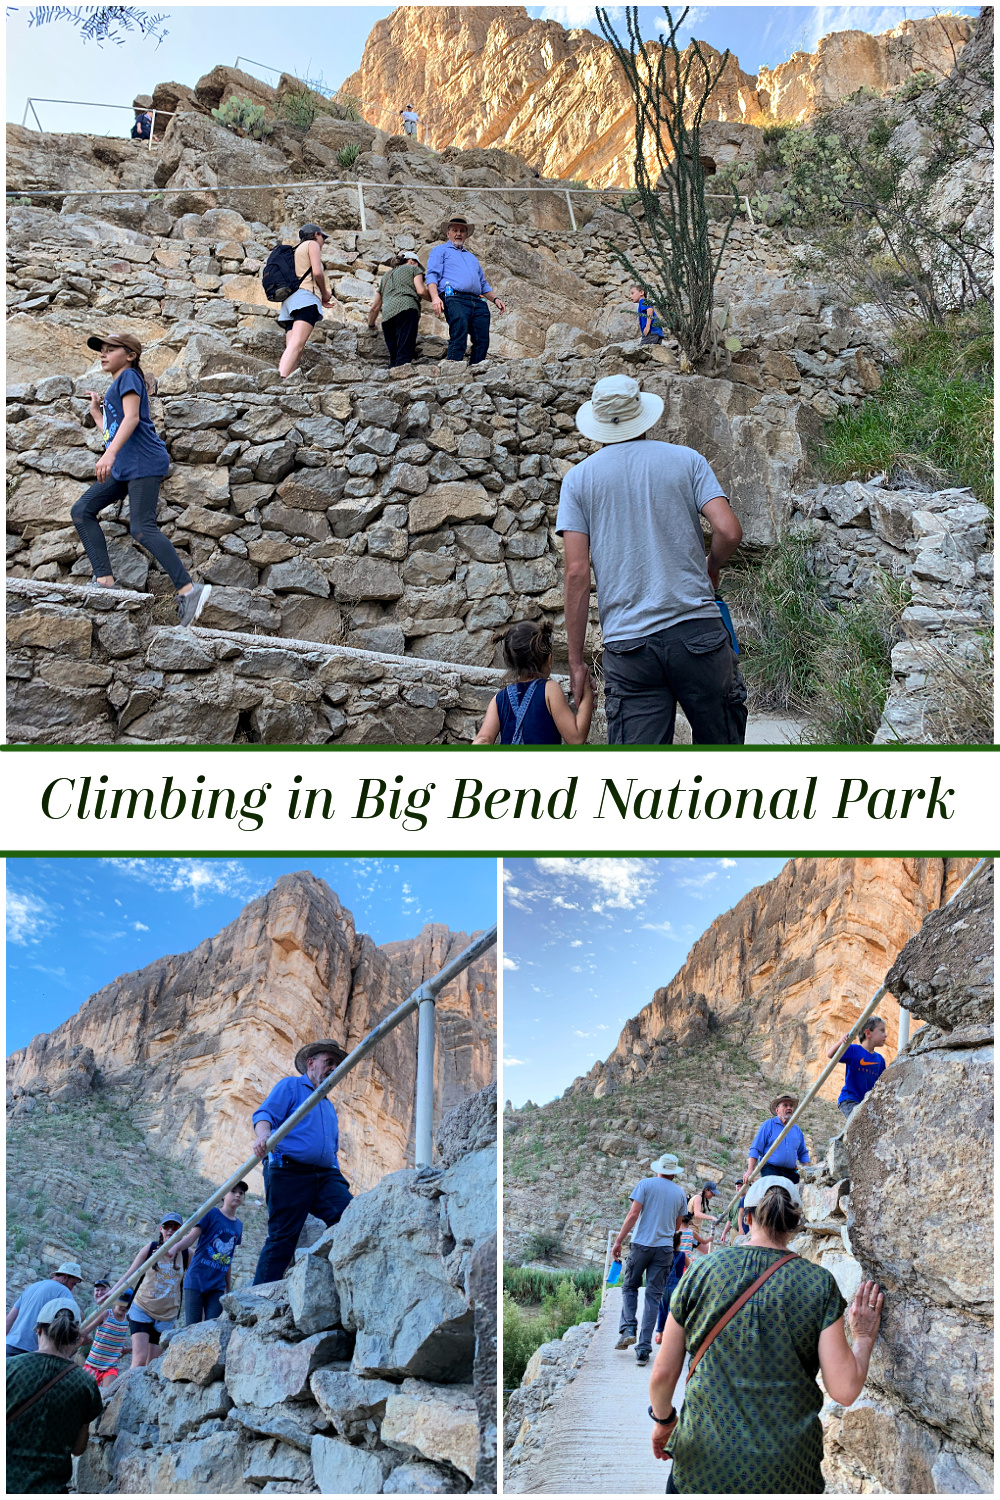 Climbing and hiking in Big Bend National Park wit family and kids.